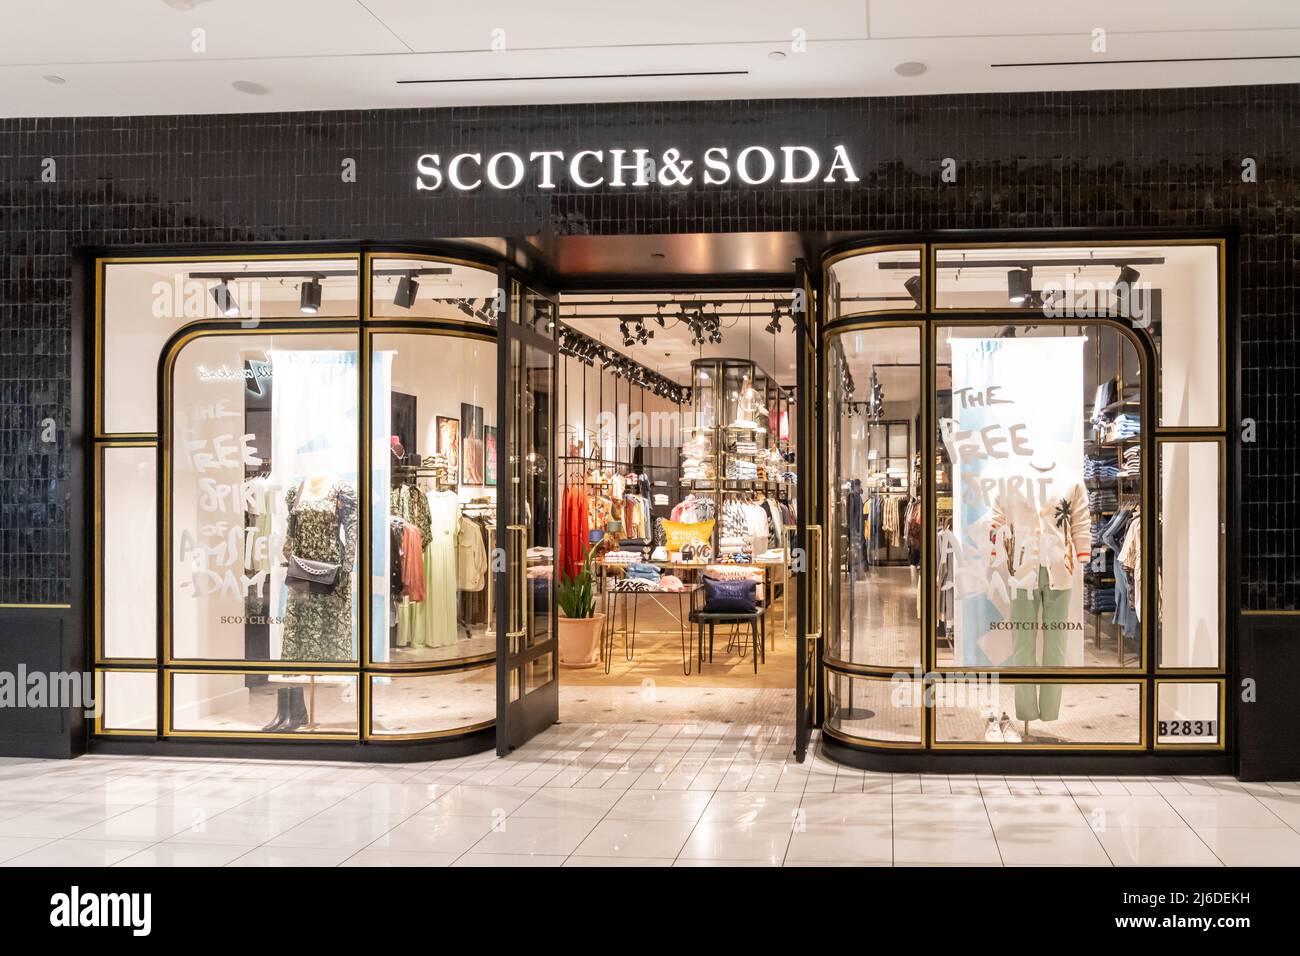 Houston, Texas, USA - February 25, 2022: Scotch and Soda store in a shopping mall. Stock Photo